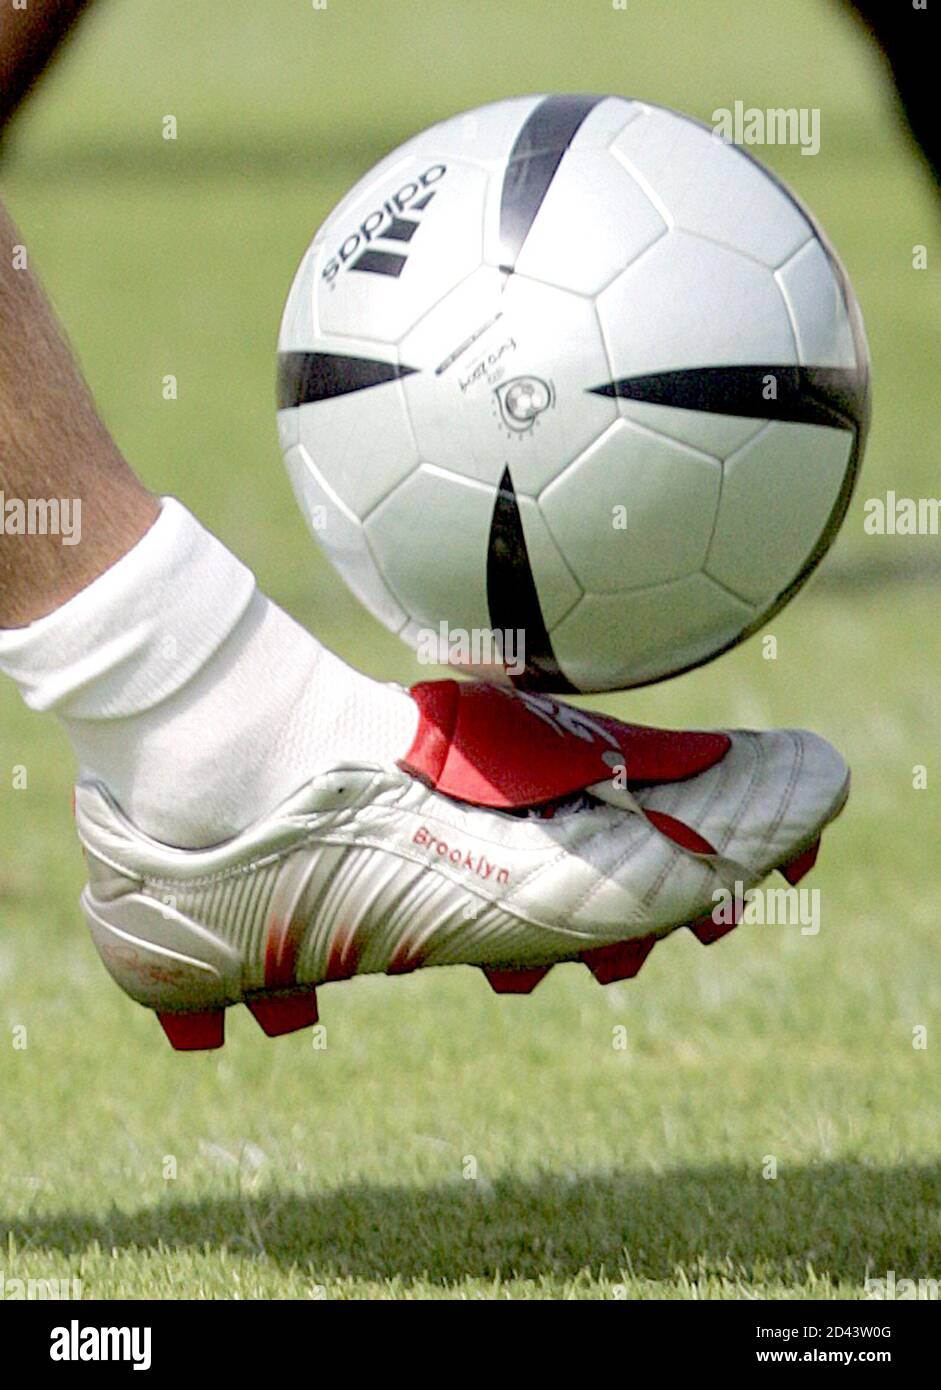 ENGLAND CAPTAIN BECKHAM CONTROLS THE BALL WITH HIS SON'S NAME ON HIS BOOT  DURING A PRACTICE SESSION AT THE NATIONAL STADIUM IN LISBON. England  captain David Beckham controls the ball as he